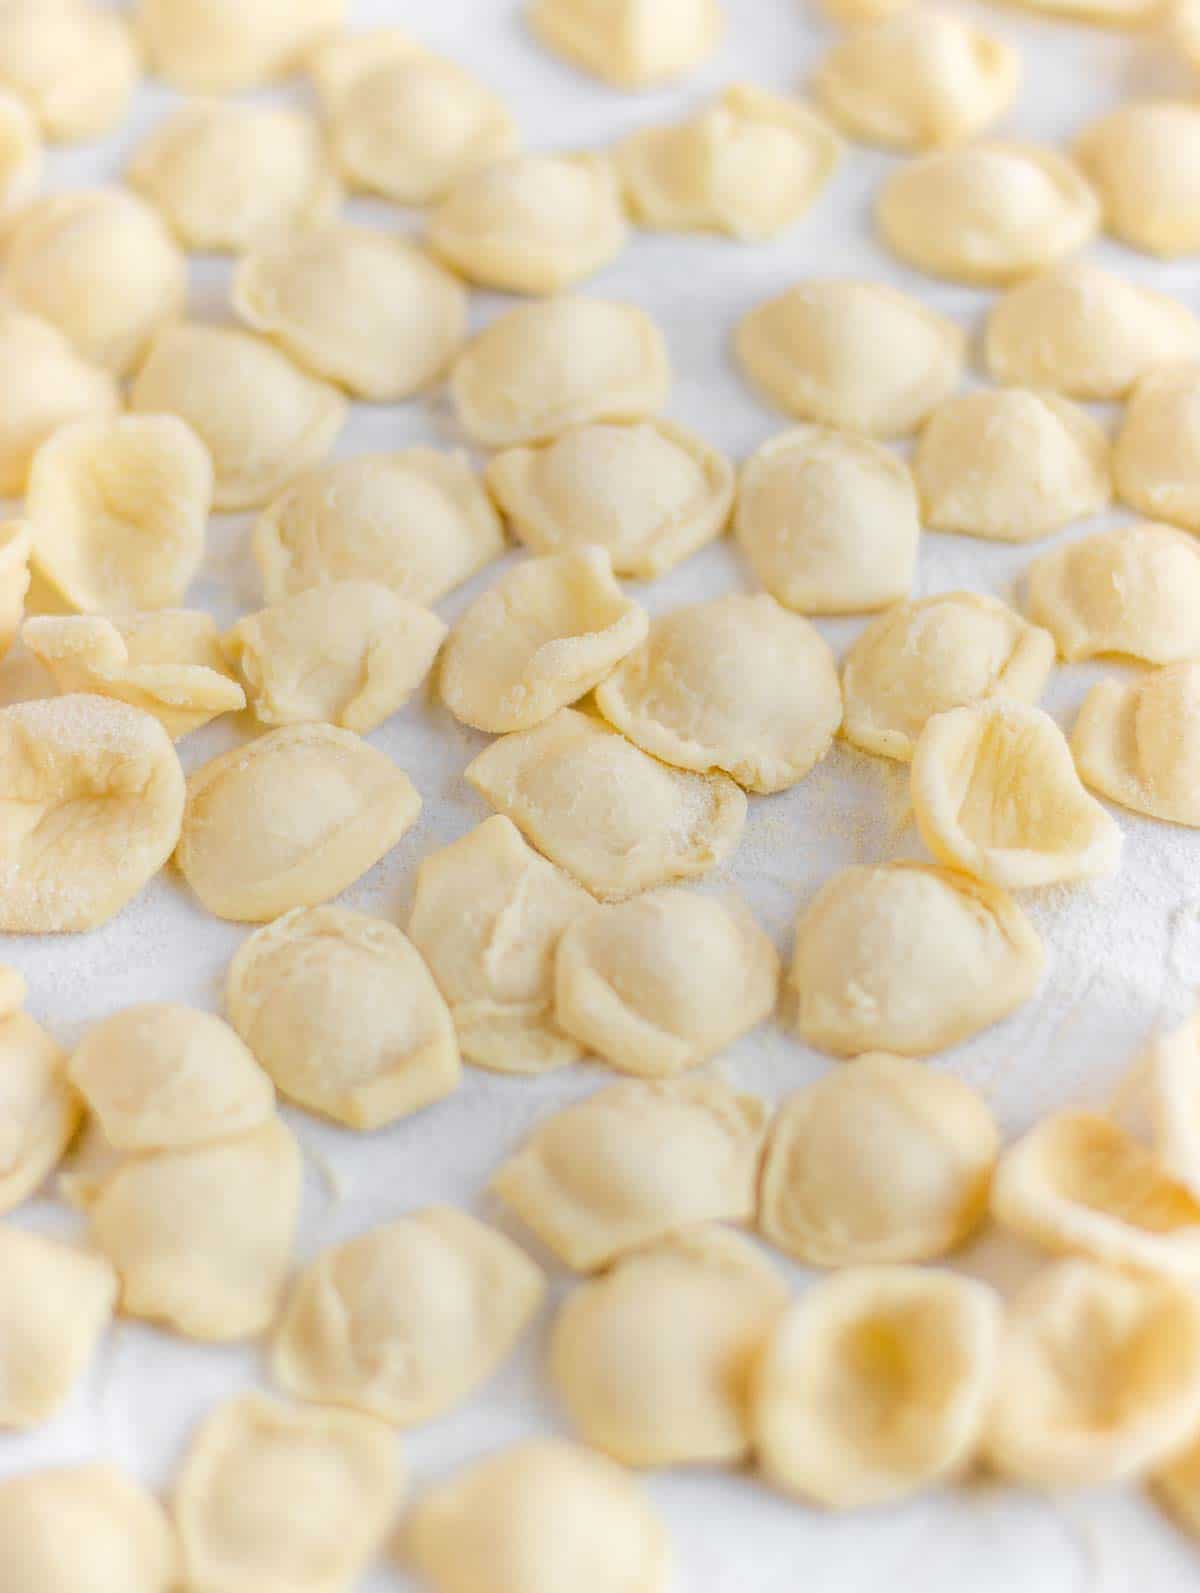 Orecchiette ready to be cooked